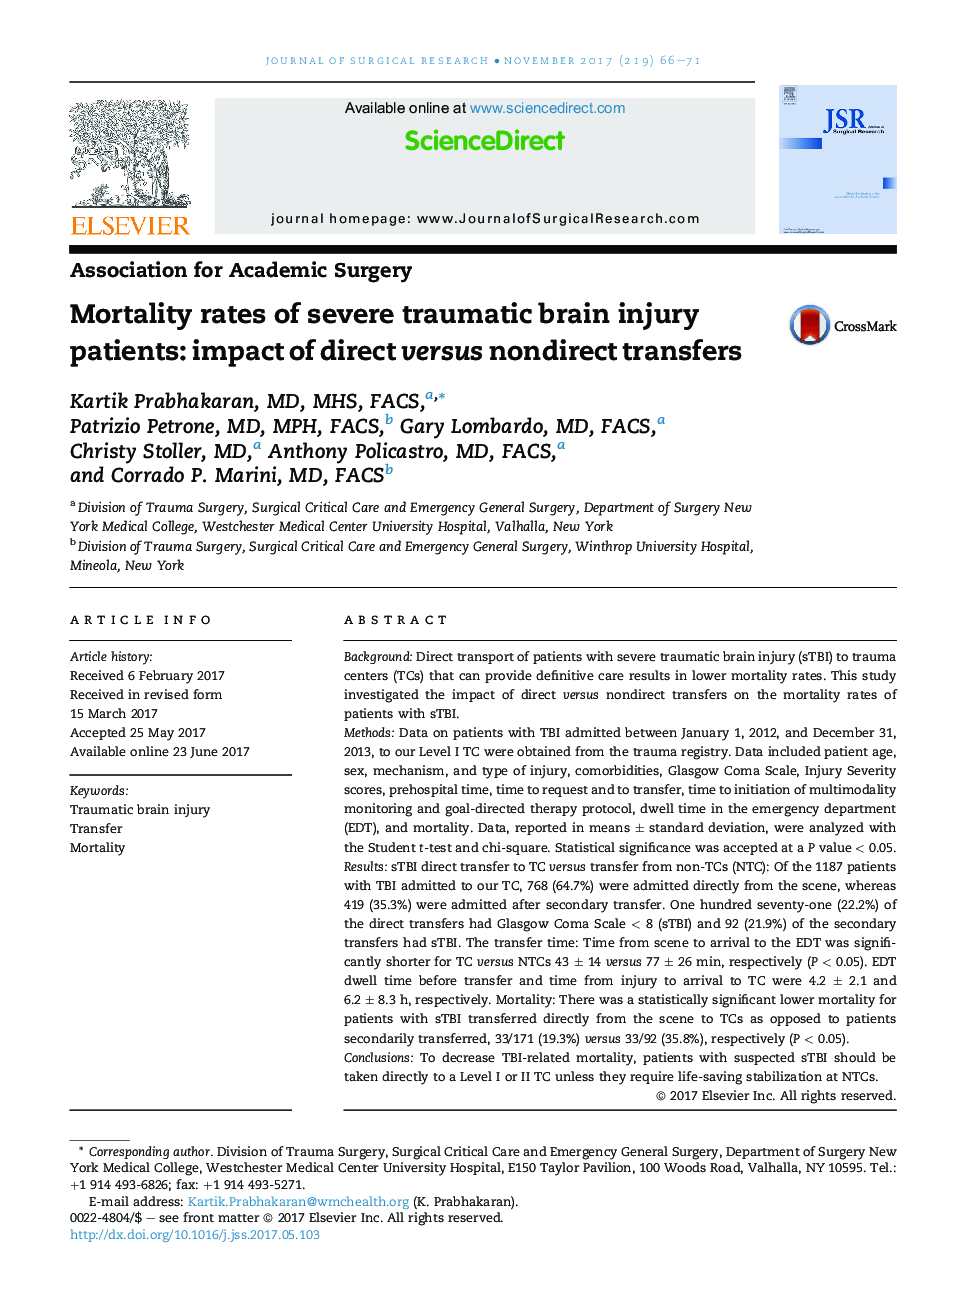 Trauma and Critical CareMortality rates of severe traumatic brain injury patients: impact of direct versus nondirect transfers